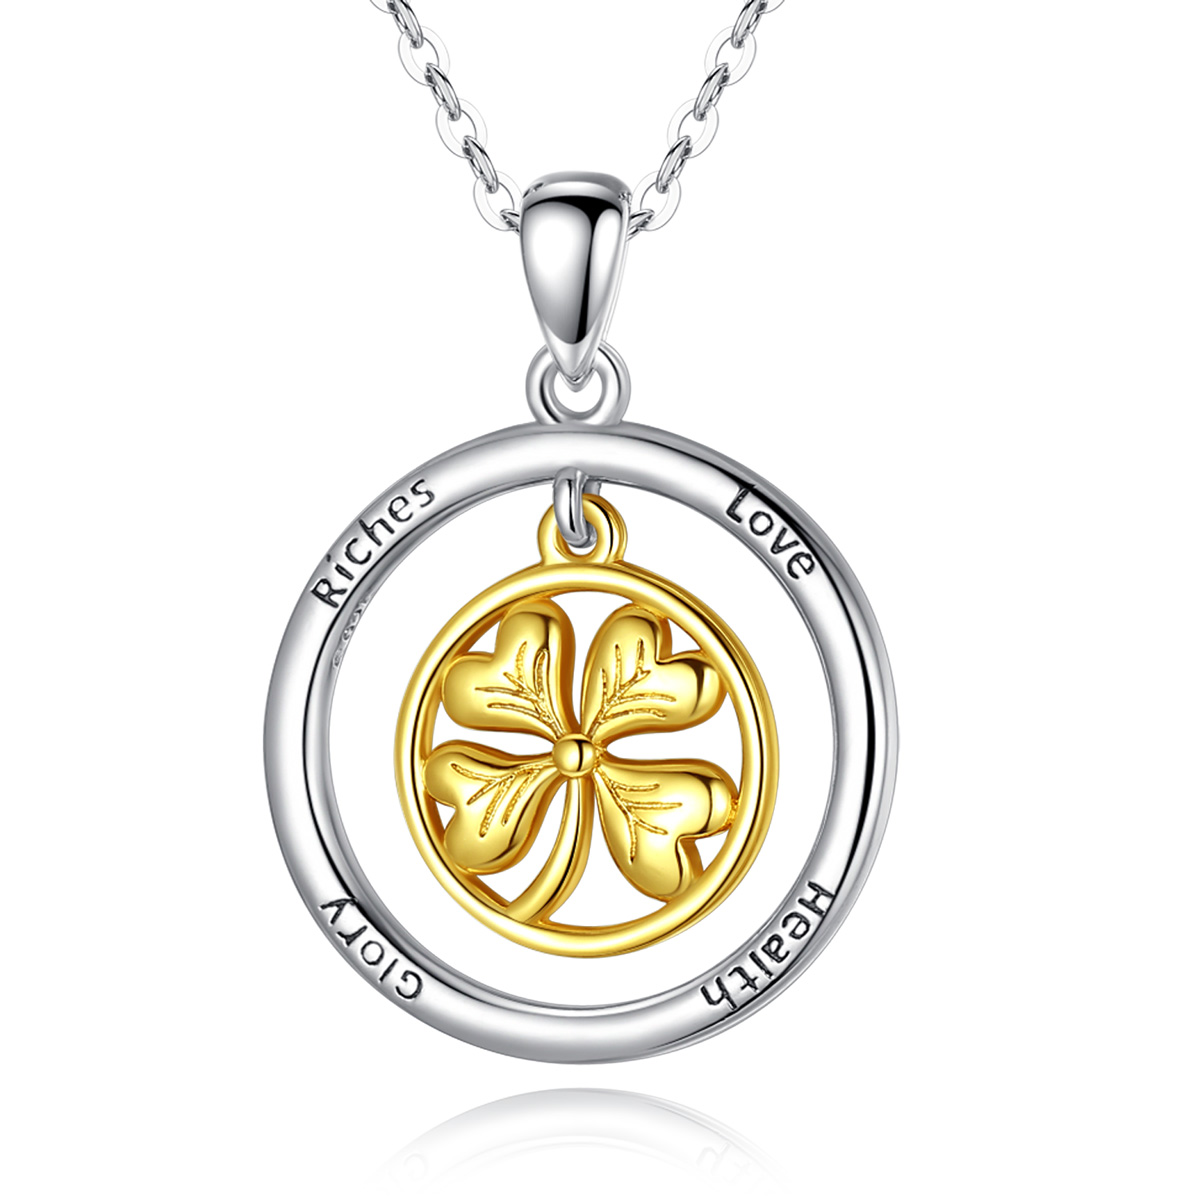 Merryshine Jewelry S925 Sterling Silver Rhodium Plated Vintage Gold Clover Pendant Necklace